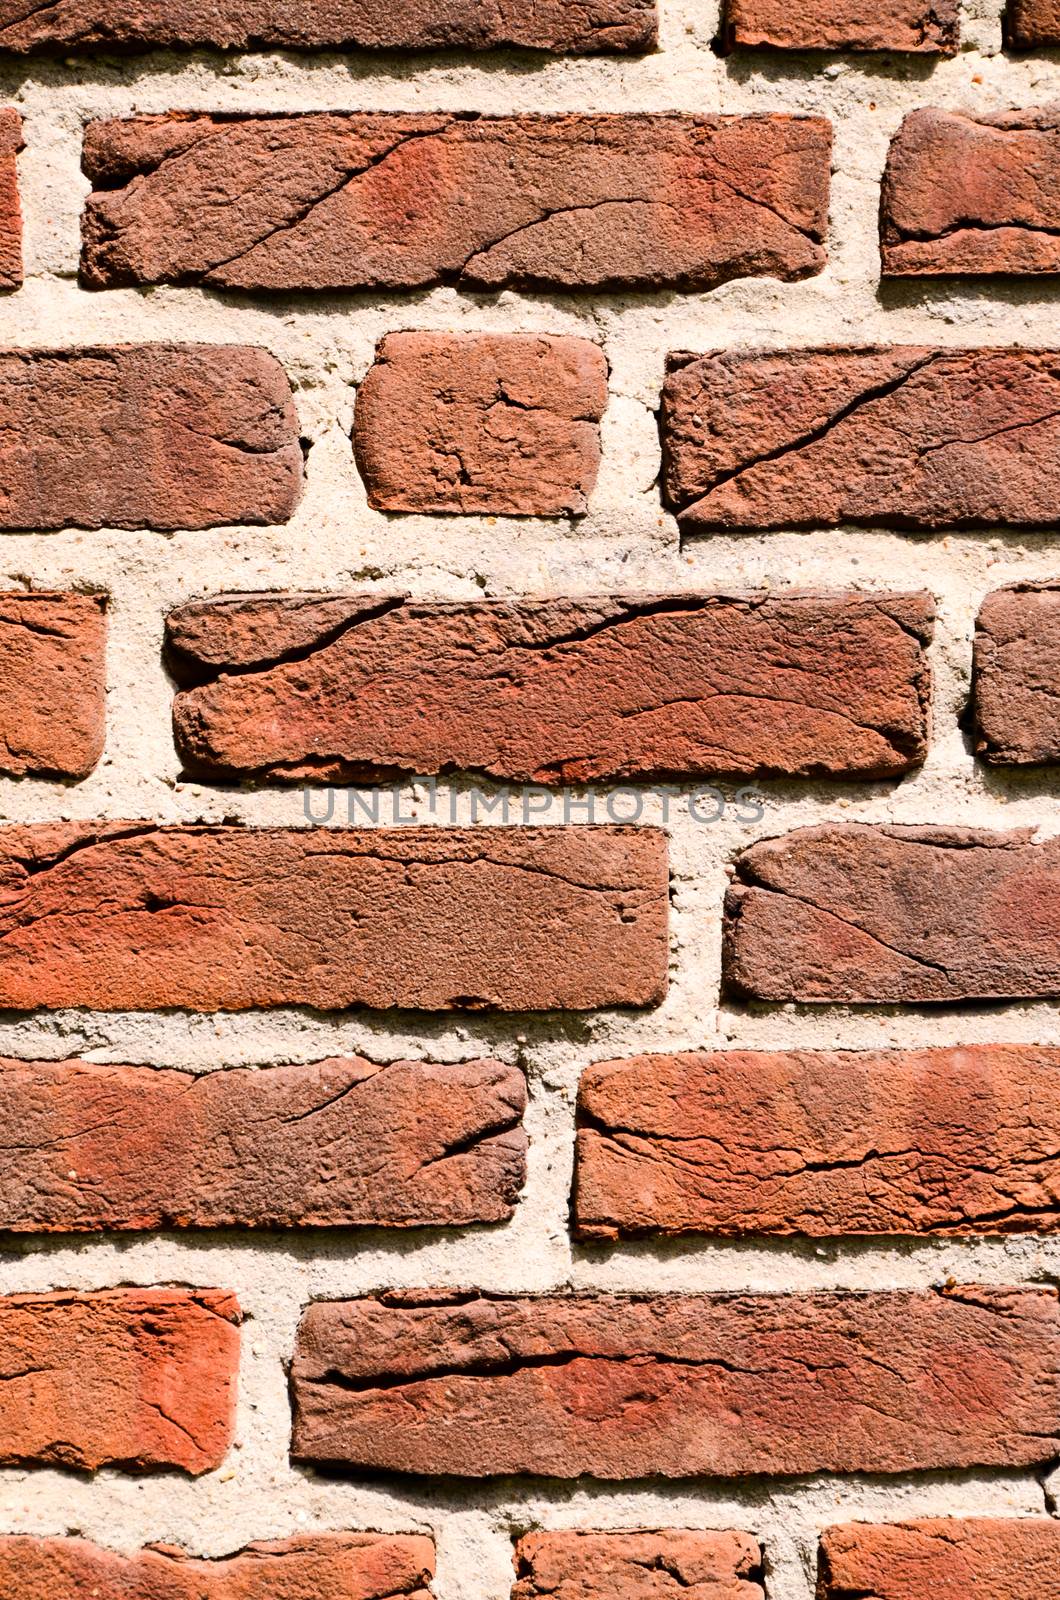 Background of Old Grunge Brick Wall Texture